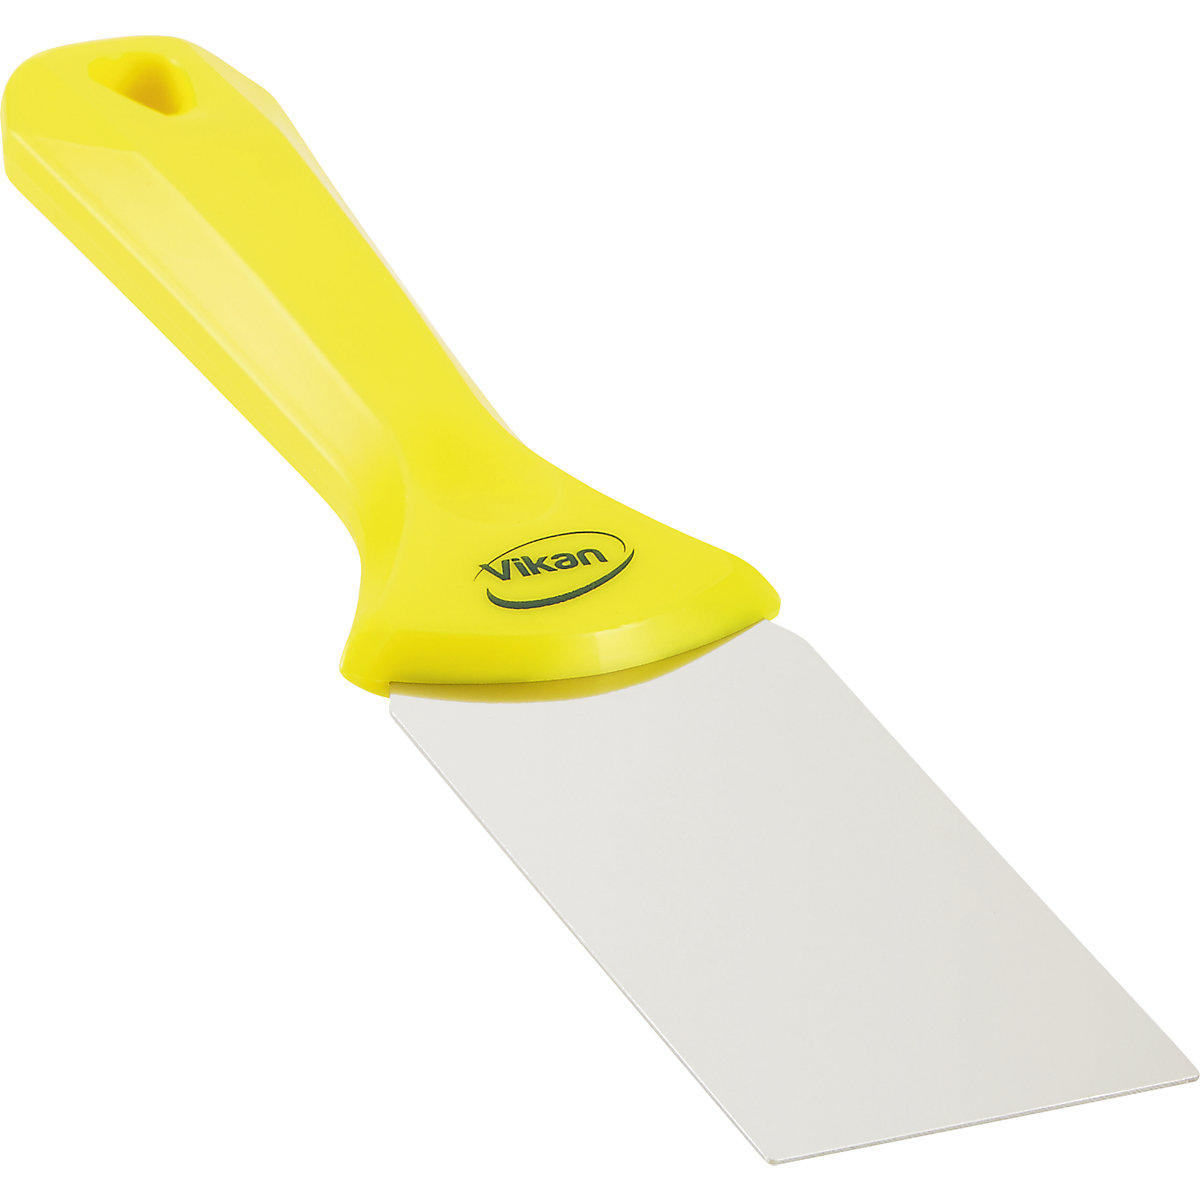 Hand scraper with stainless steel blade – Vikan, width 50 mm, pack of 10, yellow-8